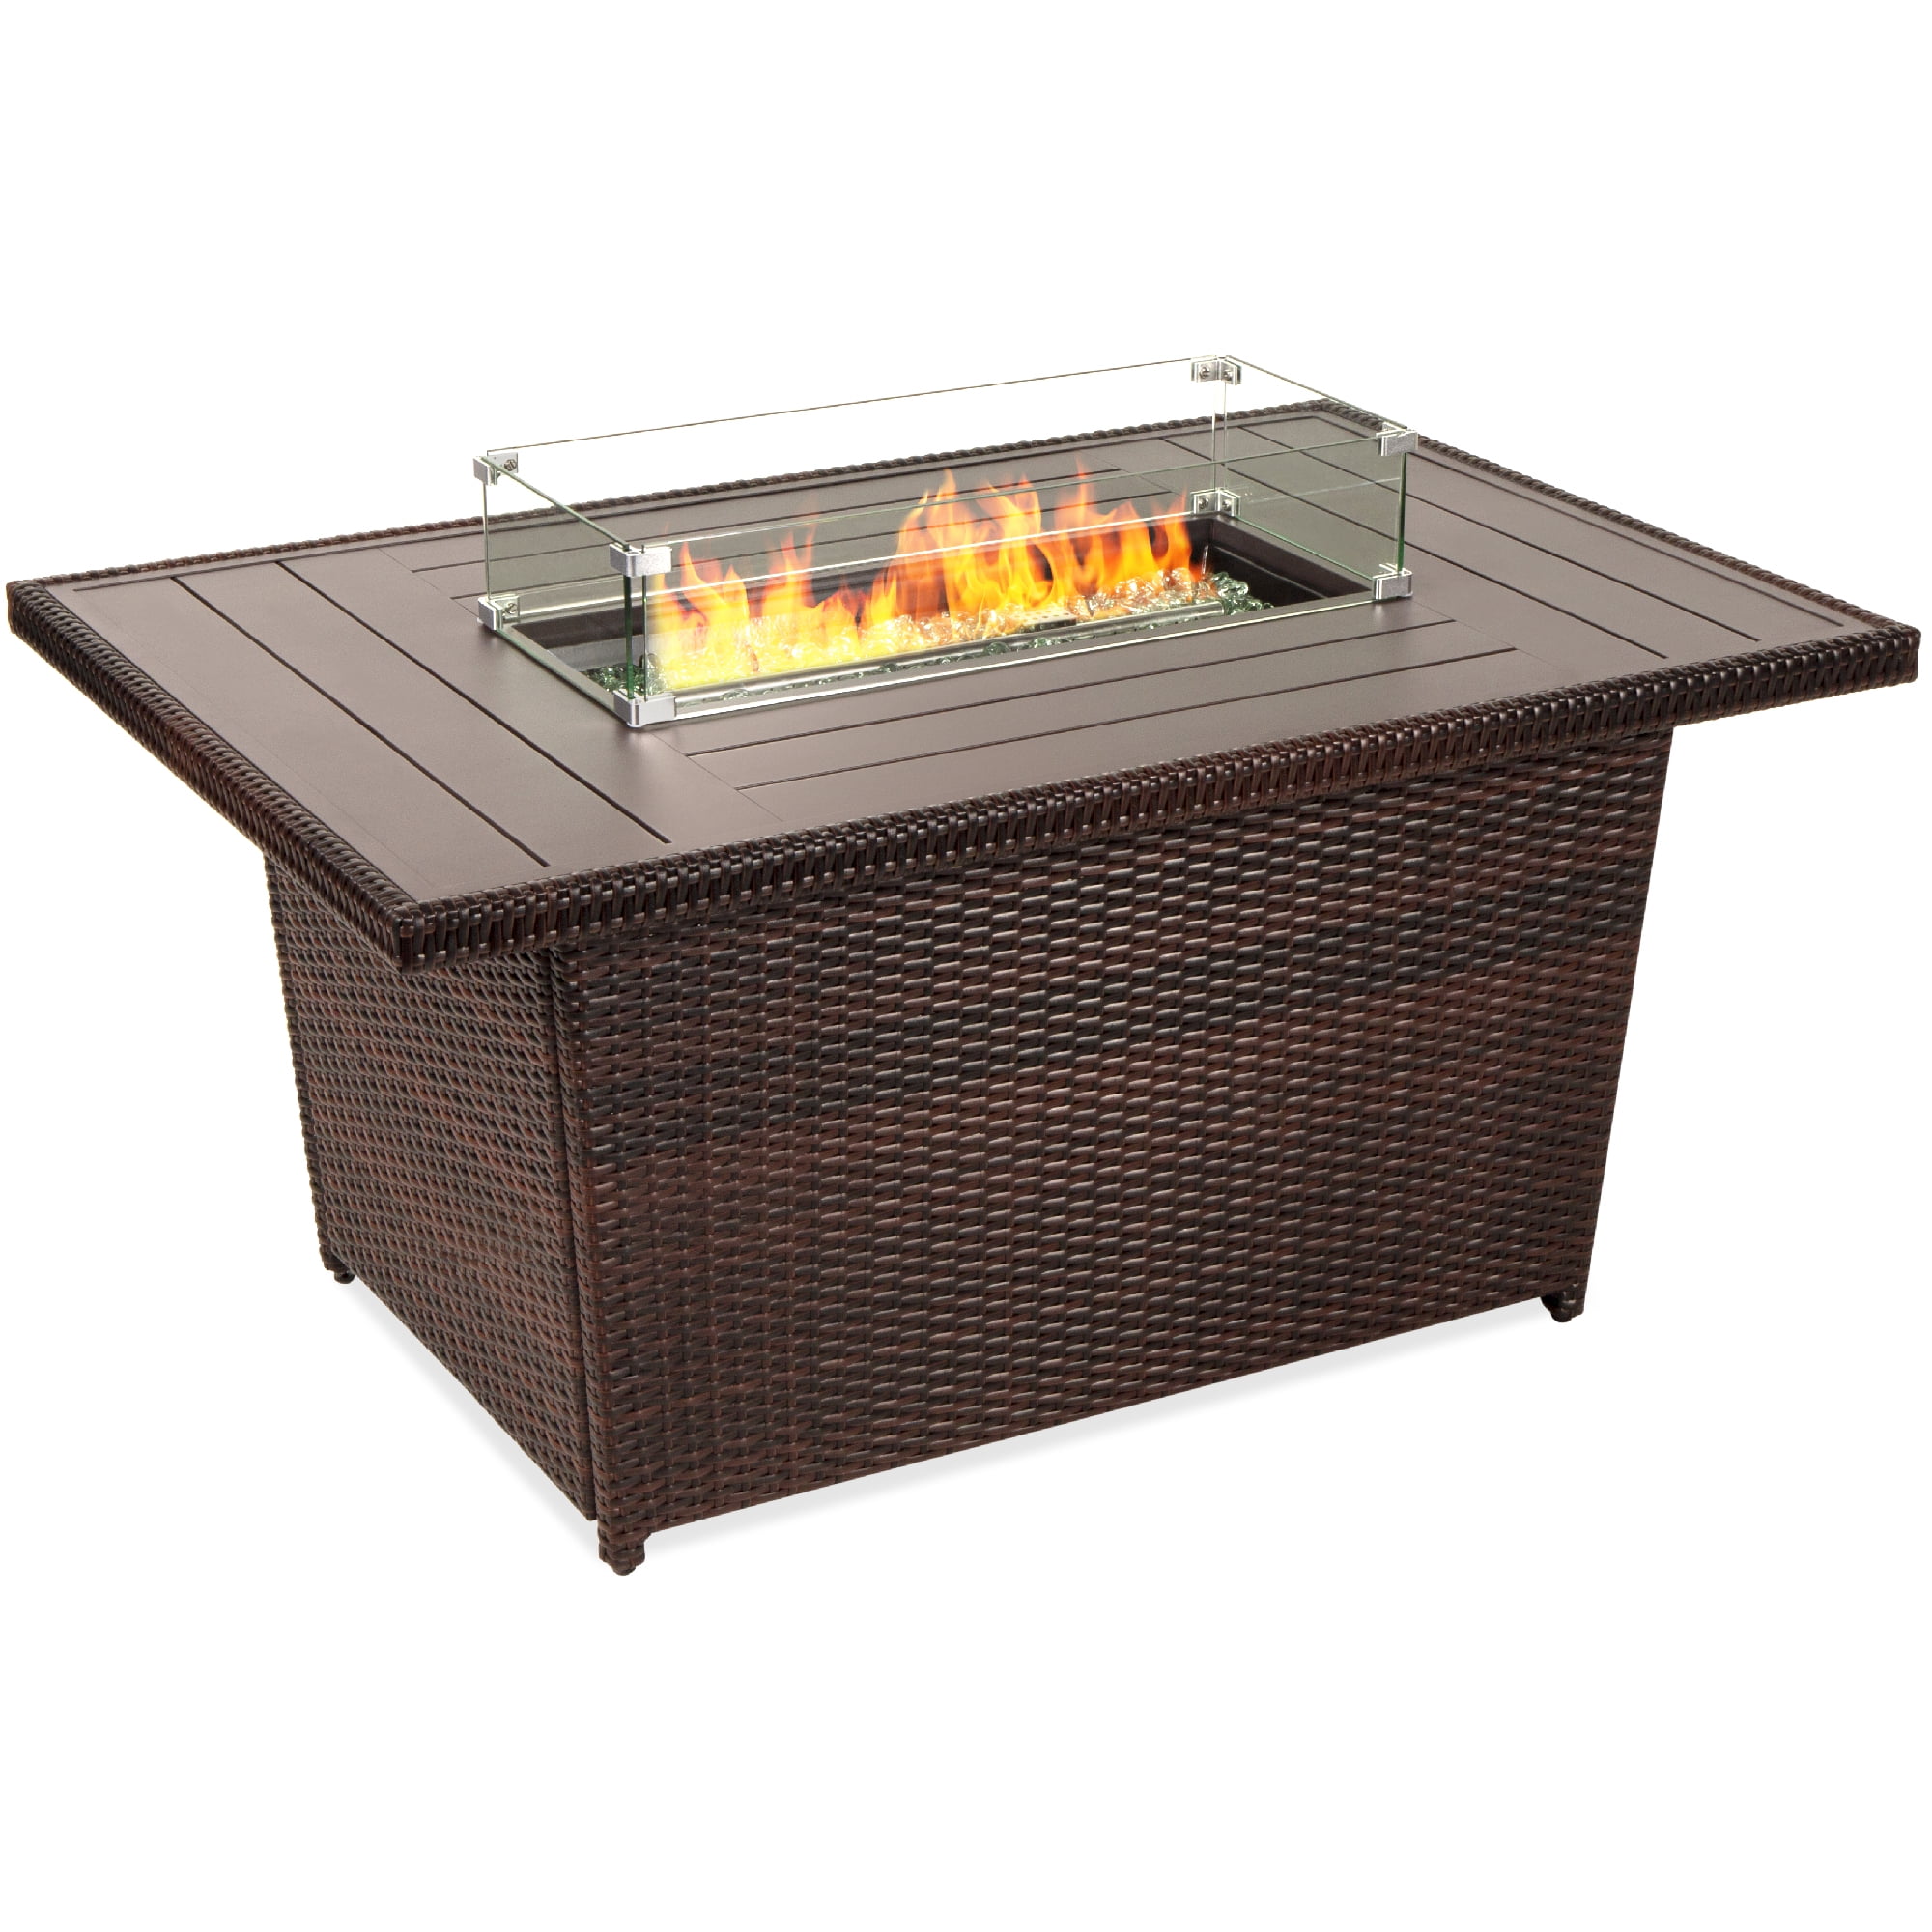 52in Wicker Propane Gas Fire Pit Table, Outdoor Lp Fire Pit